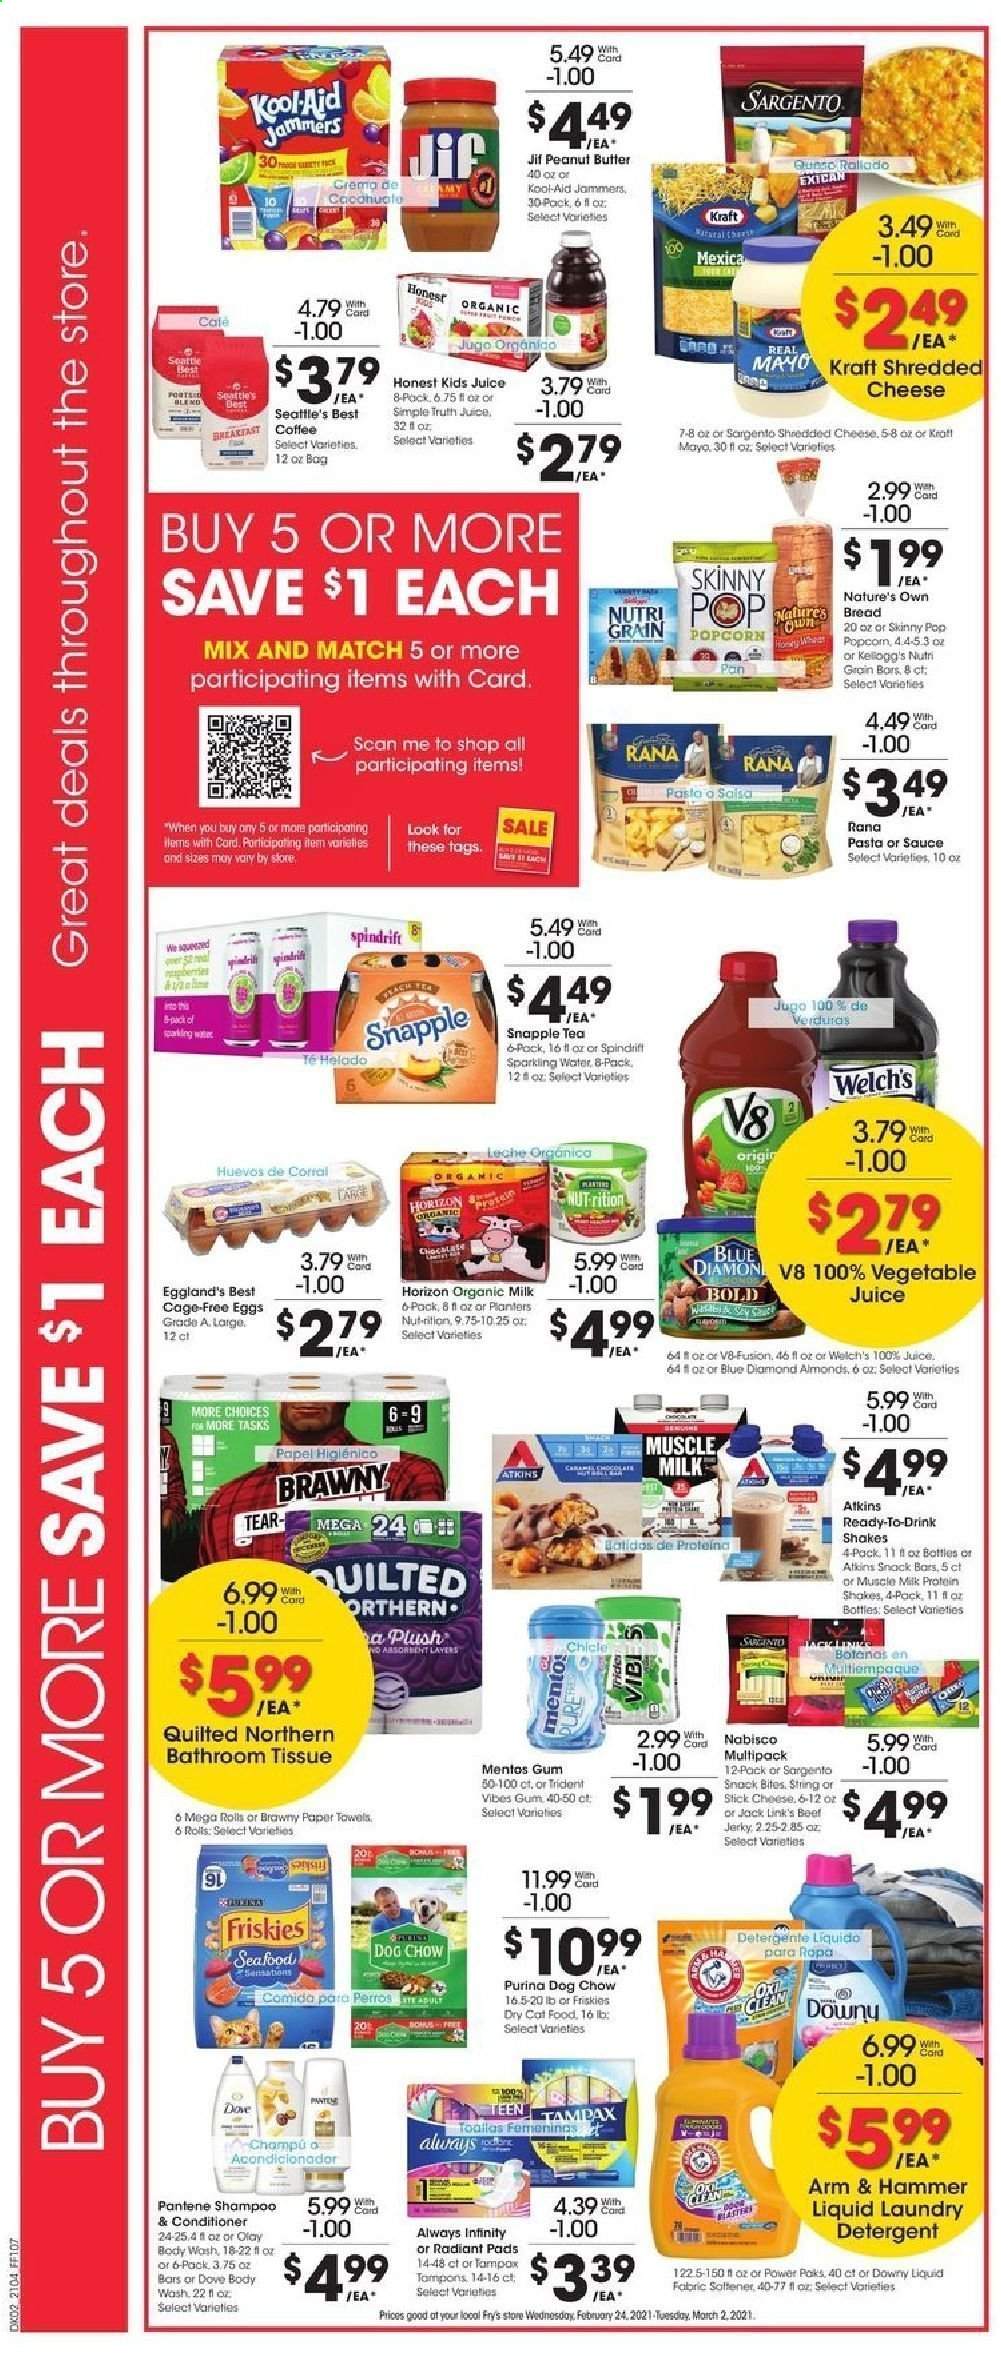 thumbnail - Fry’s Flyer - 02/24/2021 - 03/02/2021 - Sales products - bread, Welch's, Giovanni Rana, Kraft®, beef jerky, jerky, cheese, Sargento, organic milk, protein drink, shake, muscle milk, eggs, mayonnaise, salsa, Mentos, Trident, snack bar, snack, popcorn, cheese sticks, Skinny Pop, Jack Link's, ARM & HAMMER, Nutri-Grain, pasta, Rana, peanut butter, Jif, almonds, Planters, Blue Diamond, juice, Snapple, Spindrift, tea, coffee, Dove, bath tissue, Quilted Northern, tissues, kitchen towels, paper towels, detergent, laundry detergent, shampoo, Tampax, tampons, Always Infinity, Olay, conditioner, Pantene, pan, cage, animal food, cat food, Dog Chow, Purina, dry cat food, Friskies, Nature's Own. Page 3.